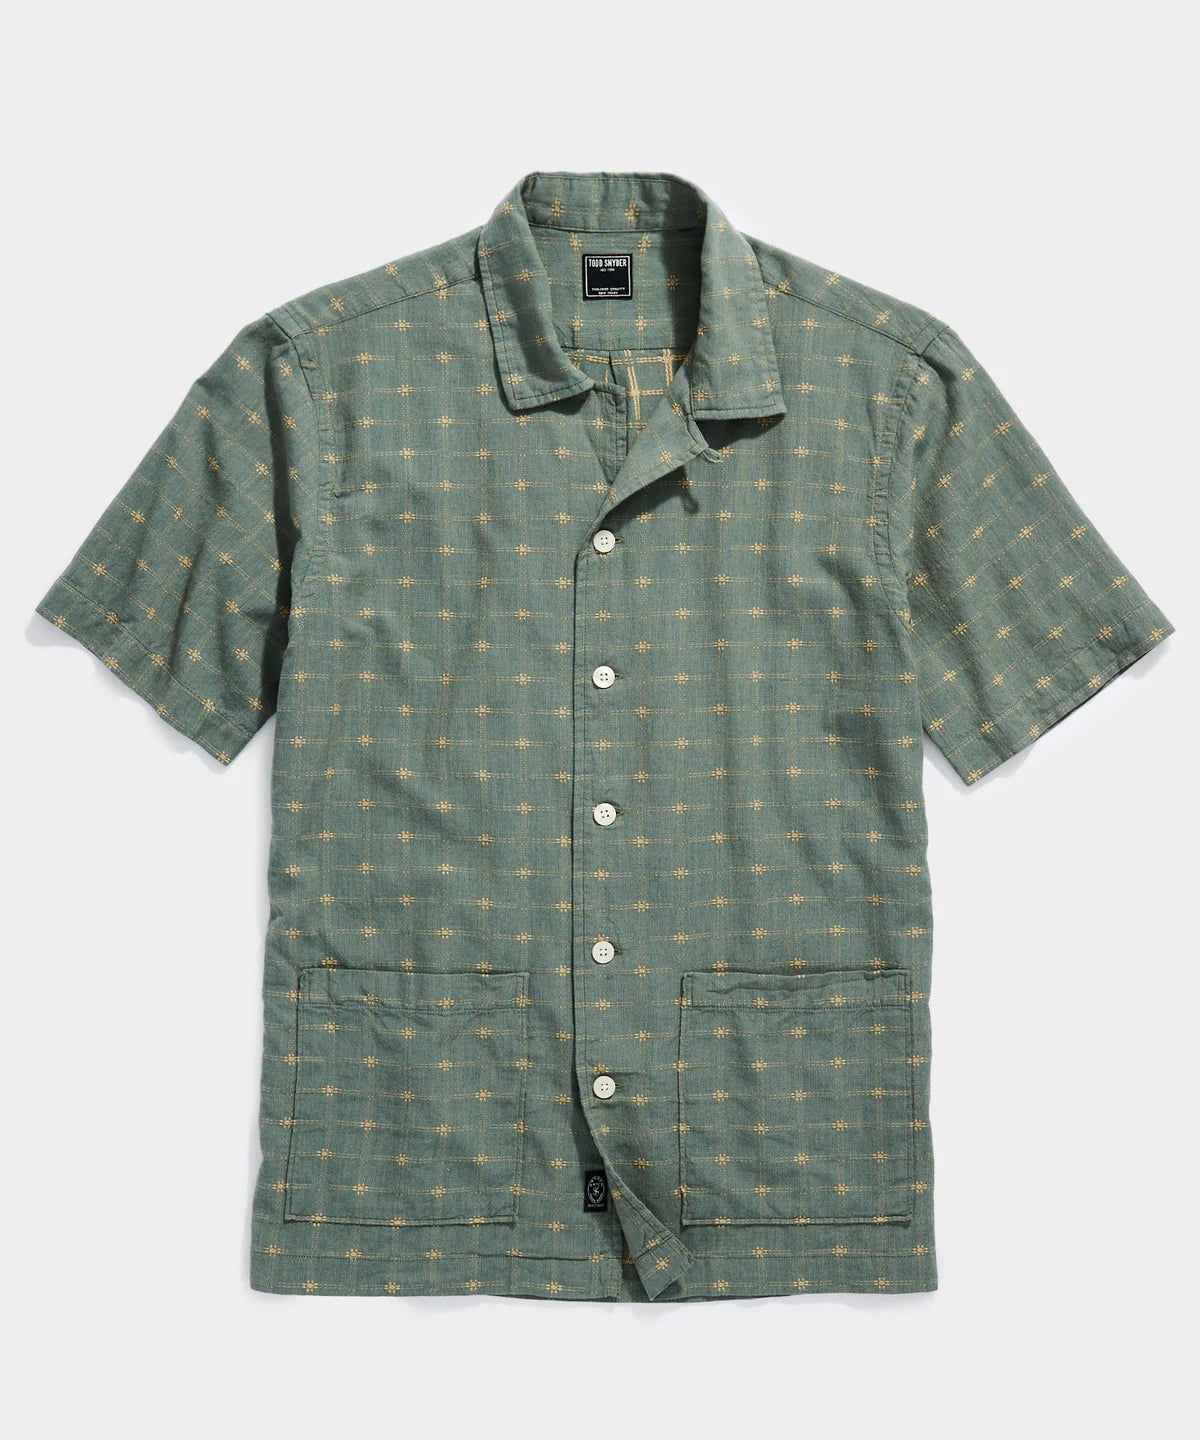 Todd Snyder - TODD SNYDER LEISURE SHIRT IN GREEN MEDALLION - Rent With Thred